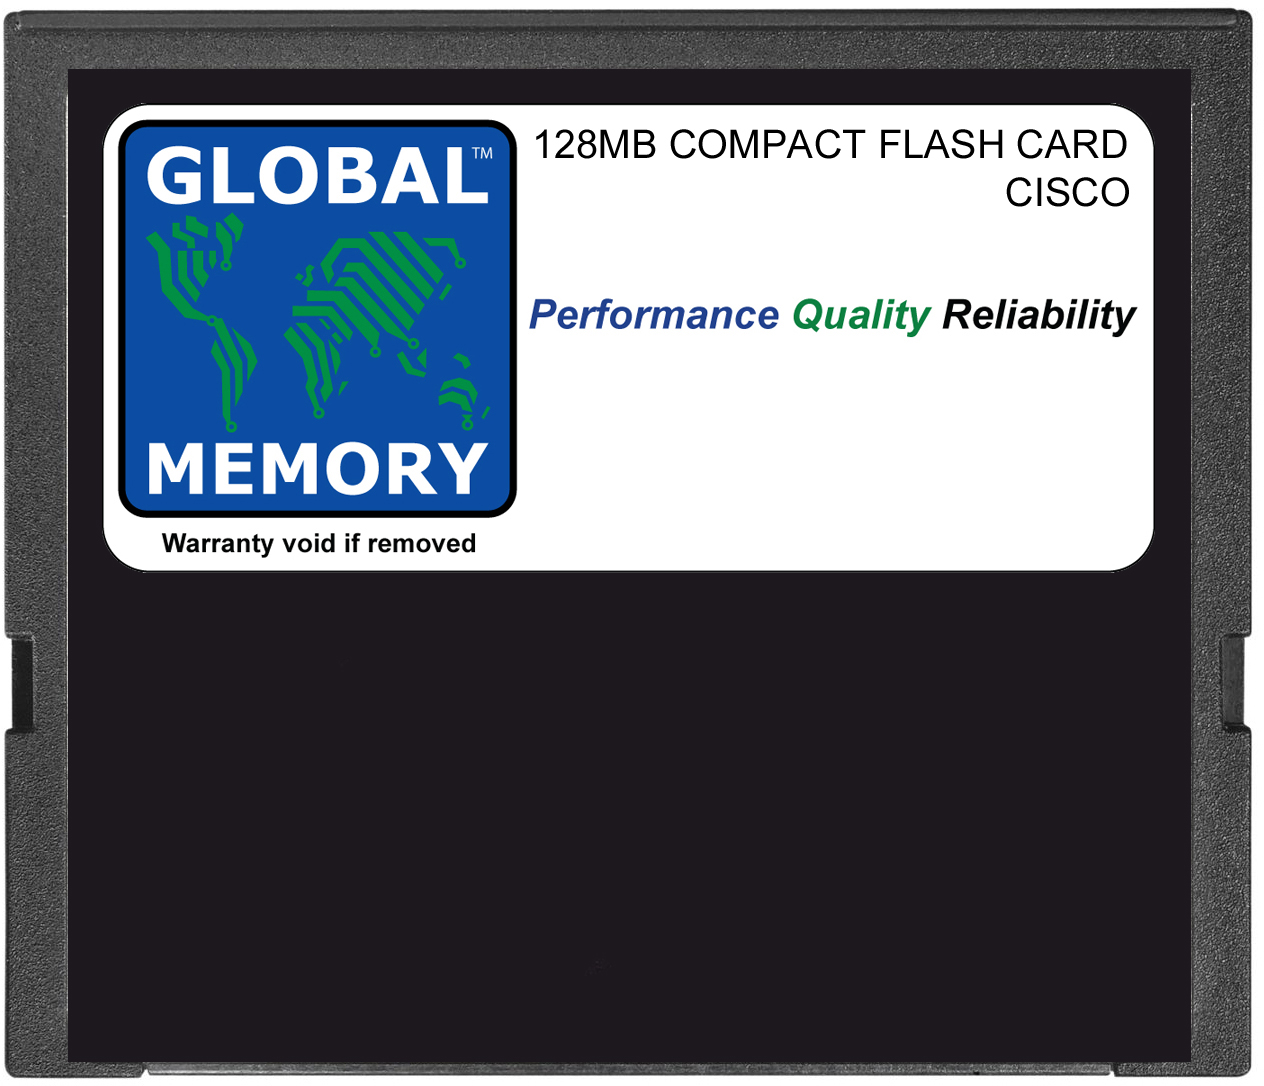 128MB COMPACT FLASH CARD MEMORY FOR CISCO 7301 ROUTER (MEM-7301-FLD128M)